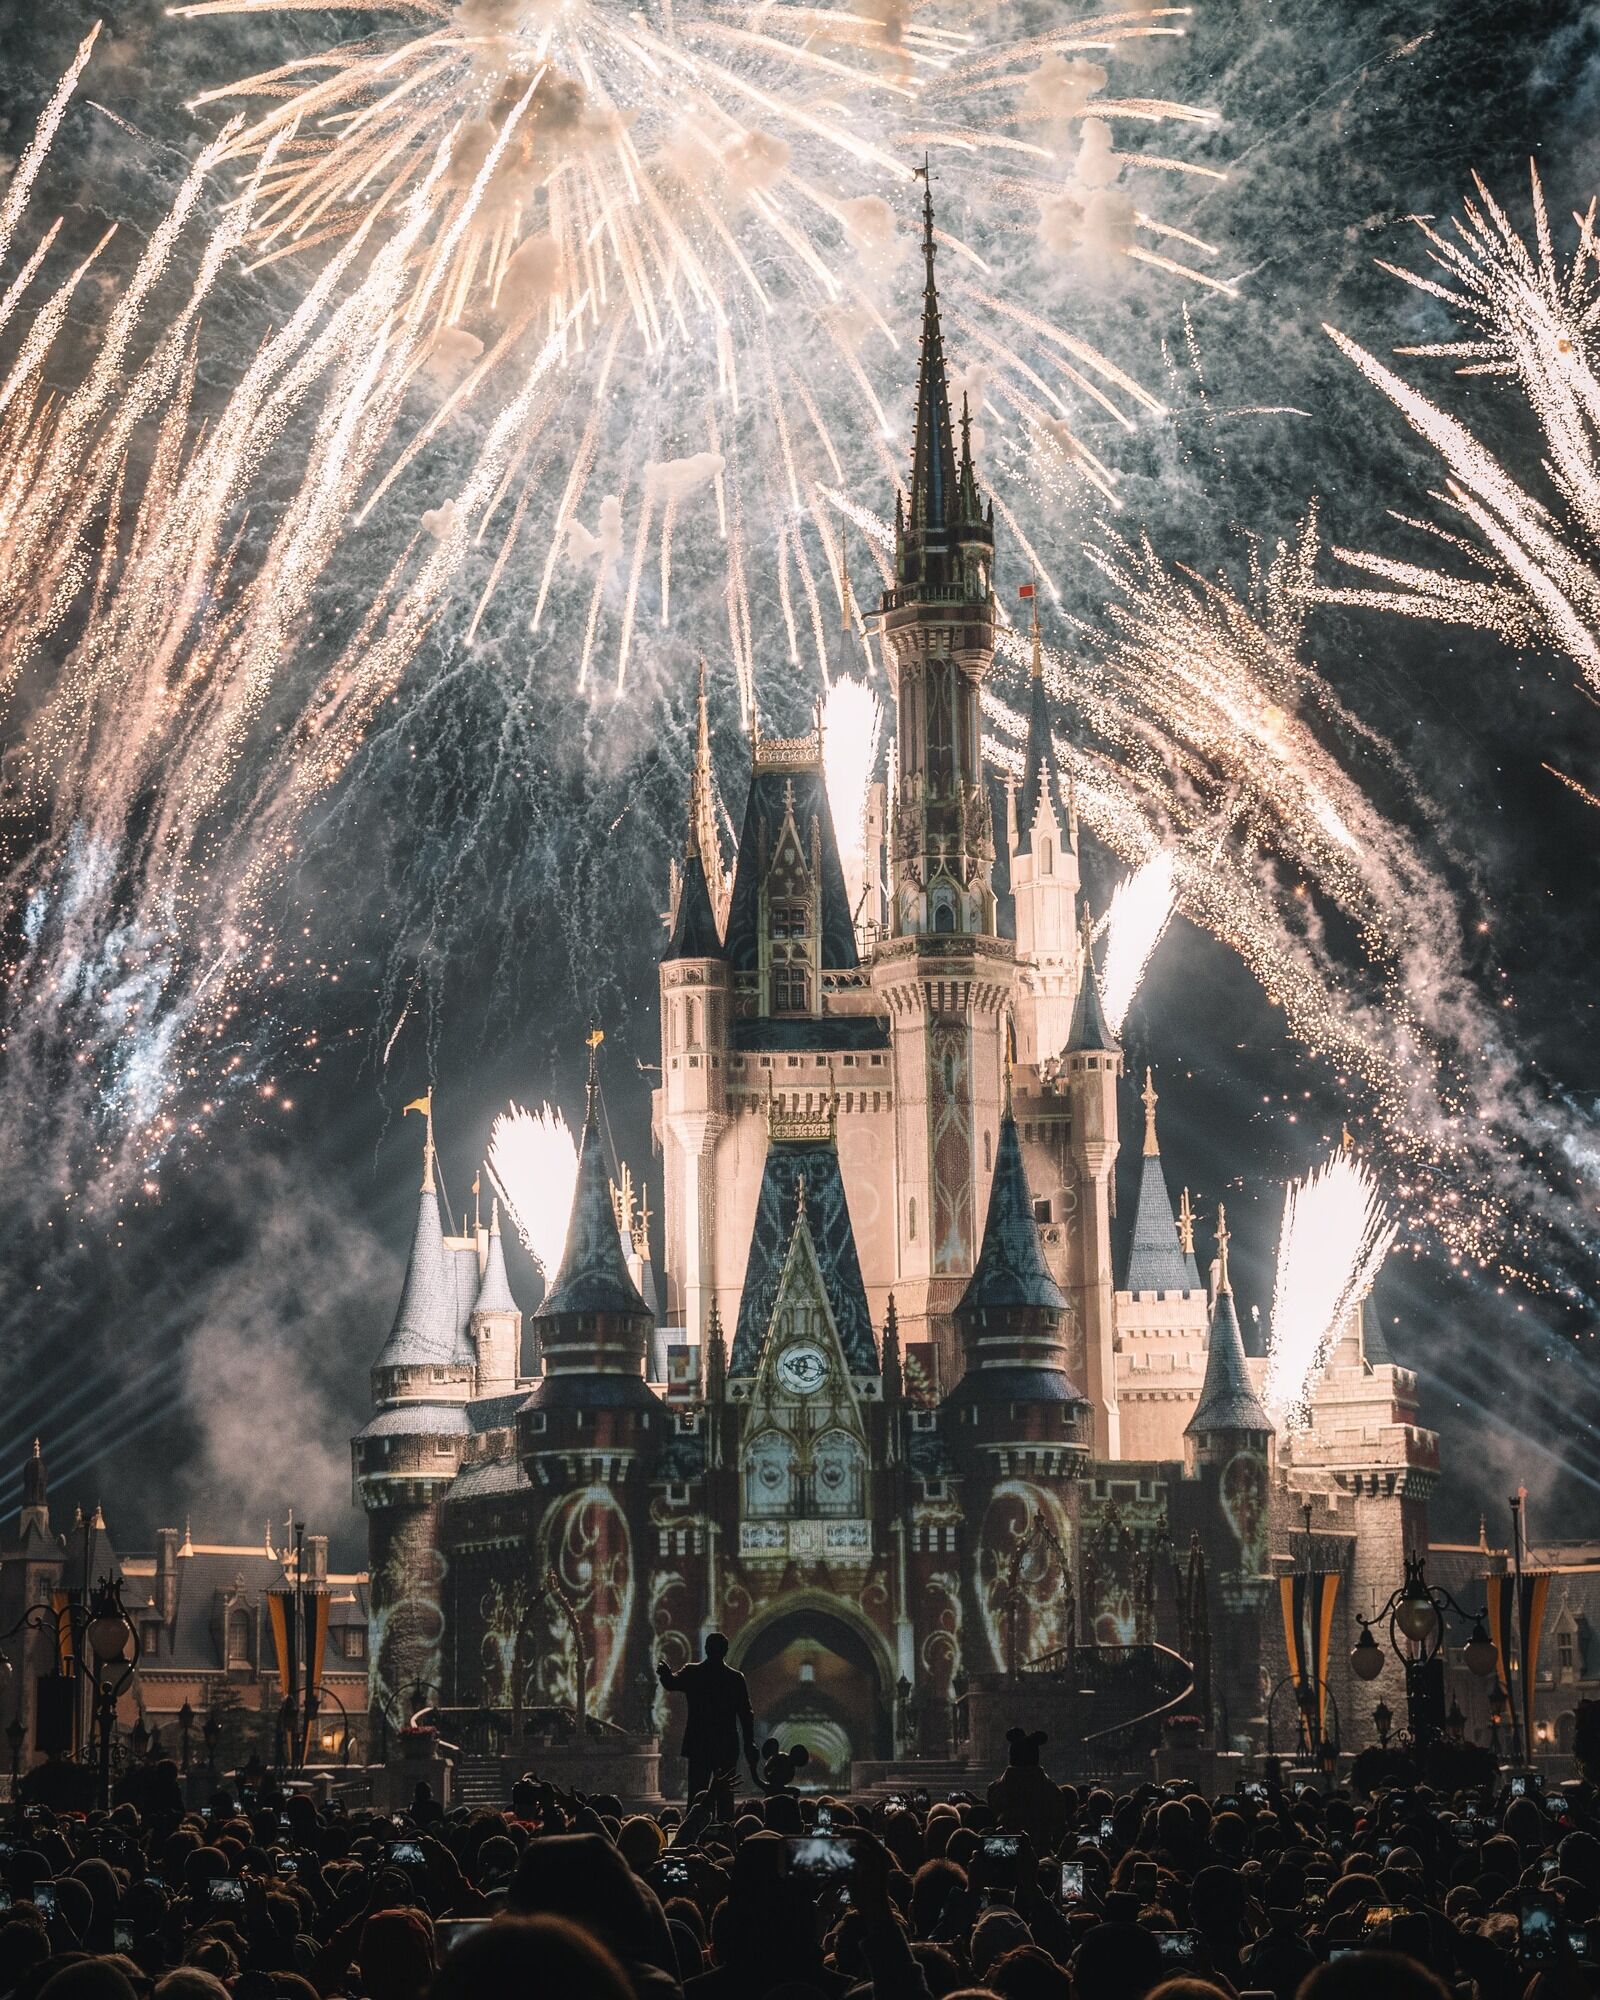 Experts have outlined the advantages and disadvantages of visiting Disney World in December